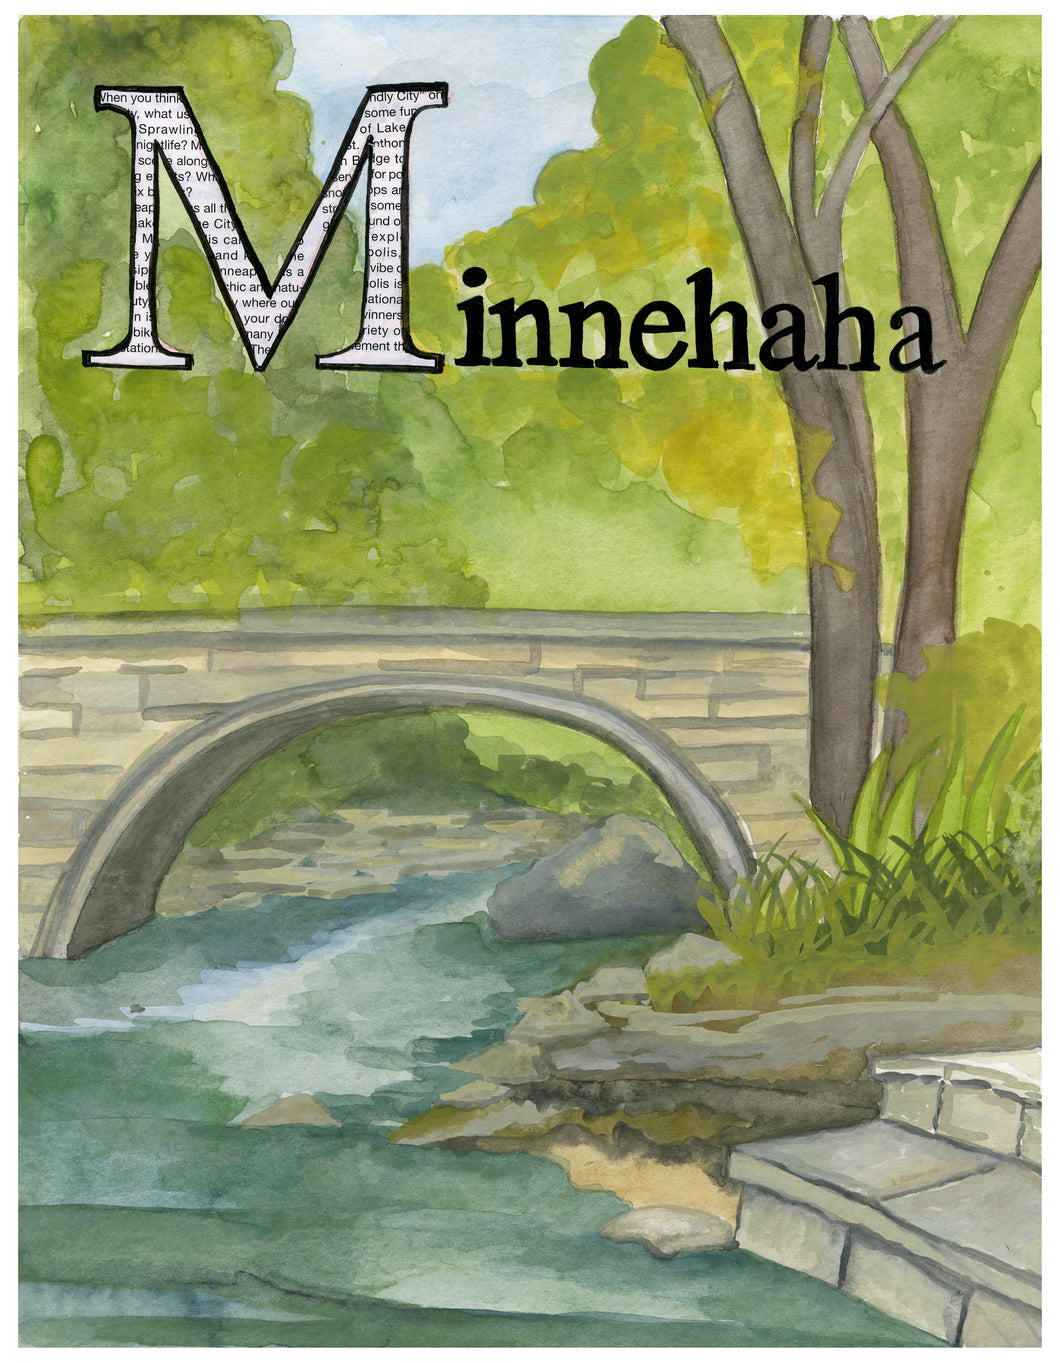 M is for Minnehaha